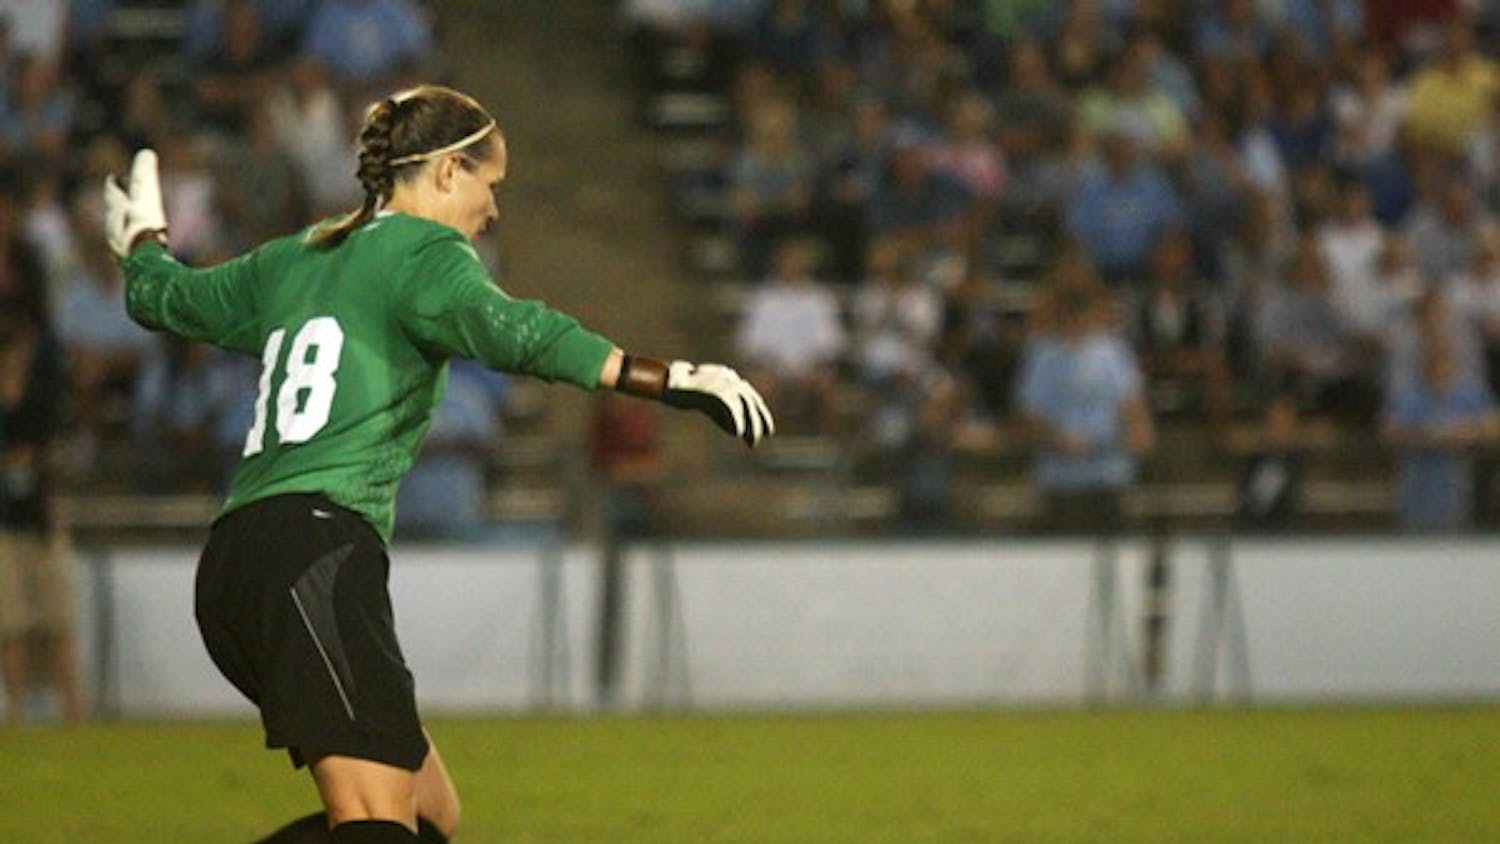 St. Louis Athletica selected UNC goalkeeper Ashlyn Harris in the second round of the WPS draft. DTH file photo